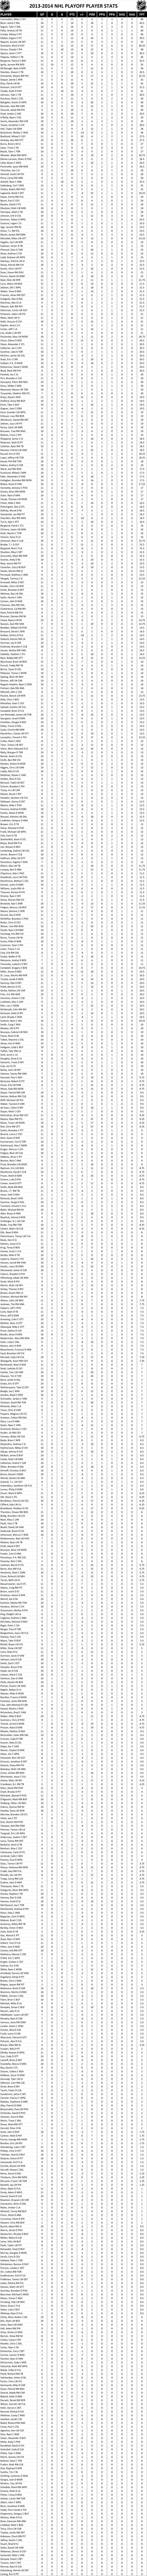 2013-2014 National Hockey League Pool Playoff Player Stats